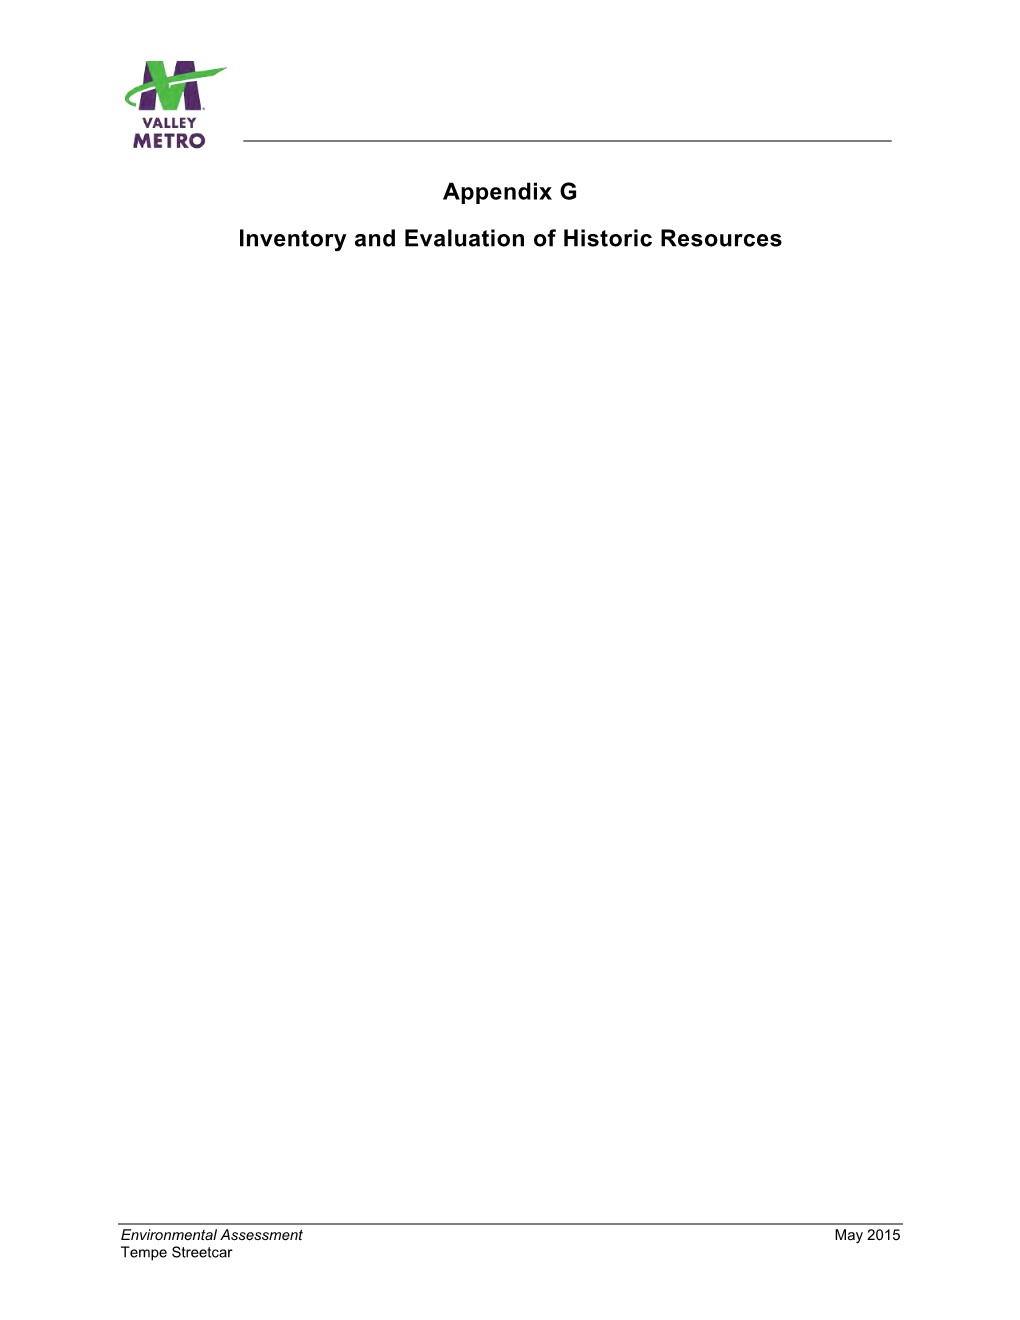 Appendix G Inventory and Evaluation of Historic Resources